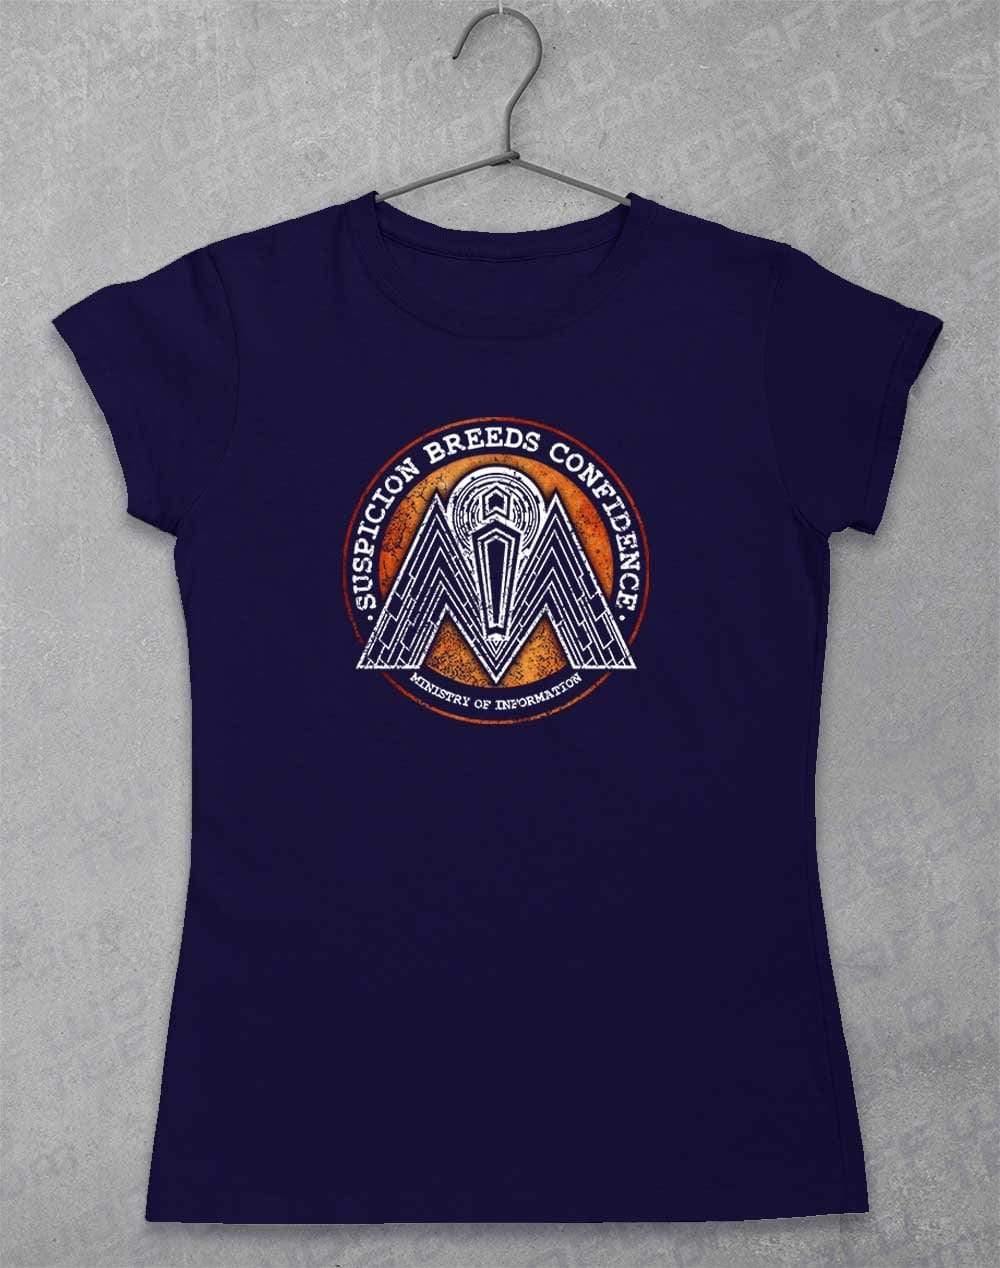 Ministry of Information Women's T-Shirt 8-10 / Navy  - Off World Tees